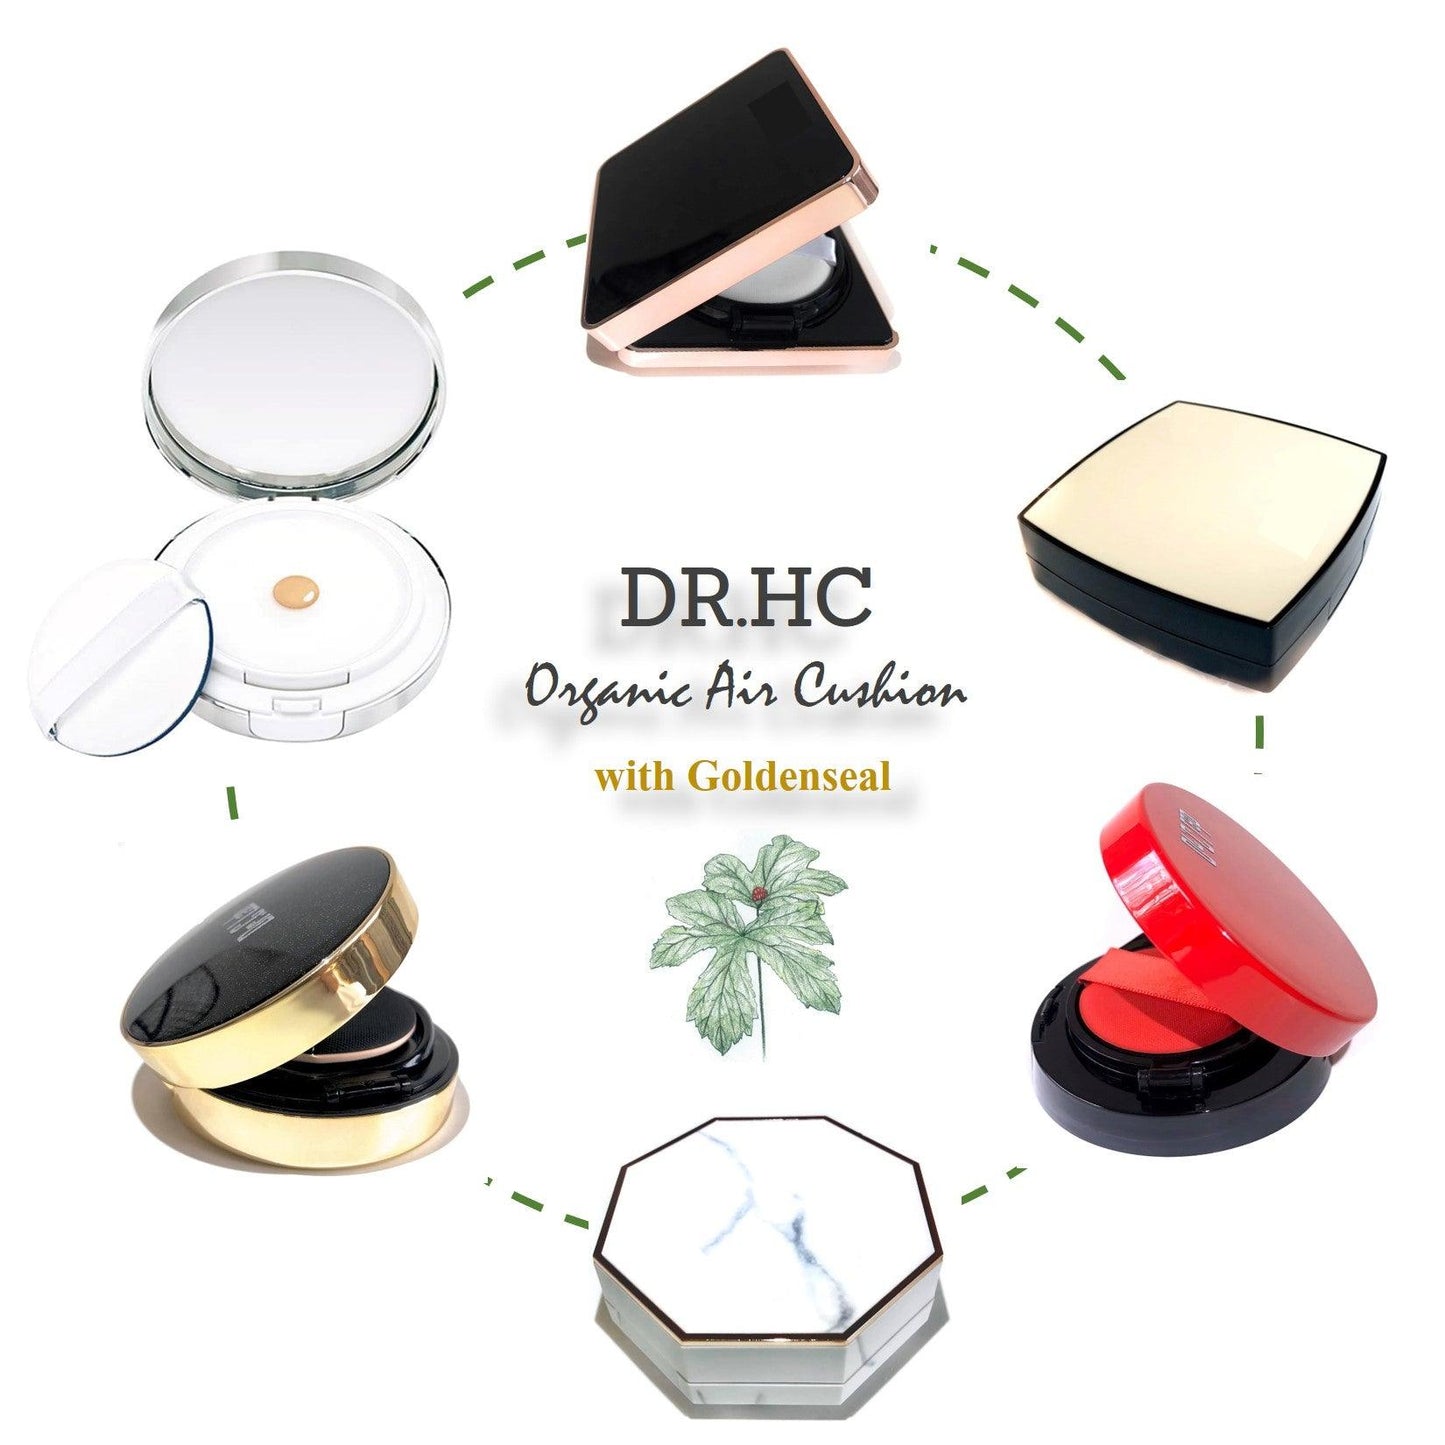 DR.HC Heart Hacker CC 6 In 1 Air Cushion Foundation (3 Shades) (15g, 0.53oz.) (Natural UV Care, Anti-aging, Anti-acne, Skin recovery...)